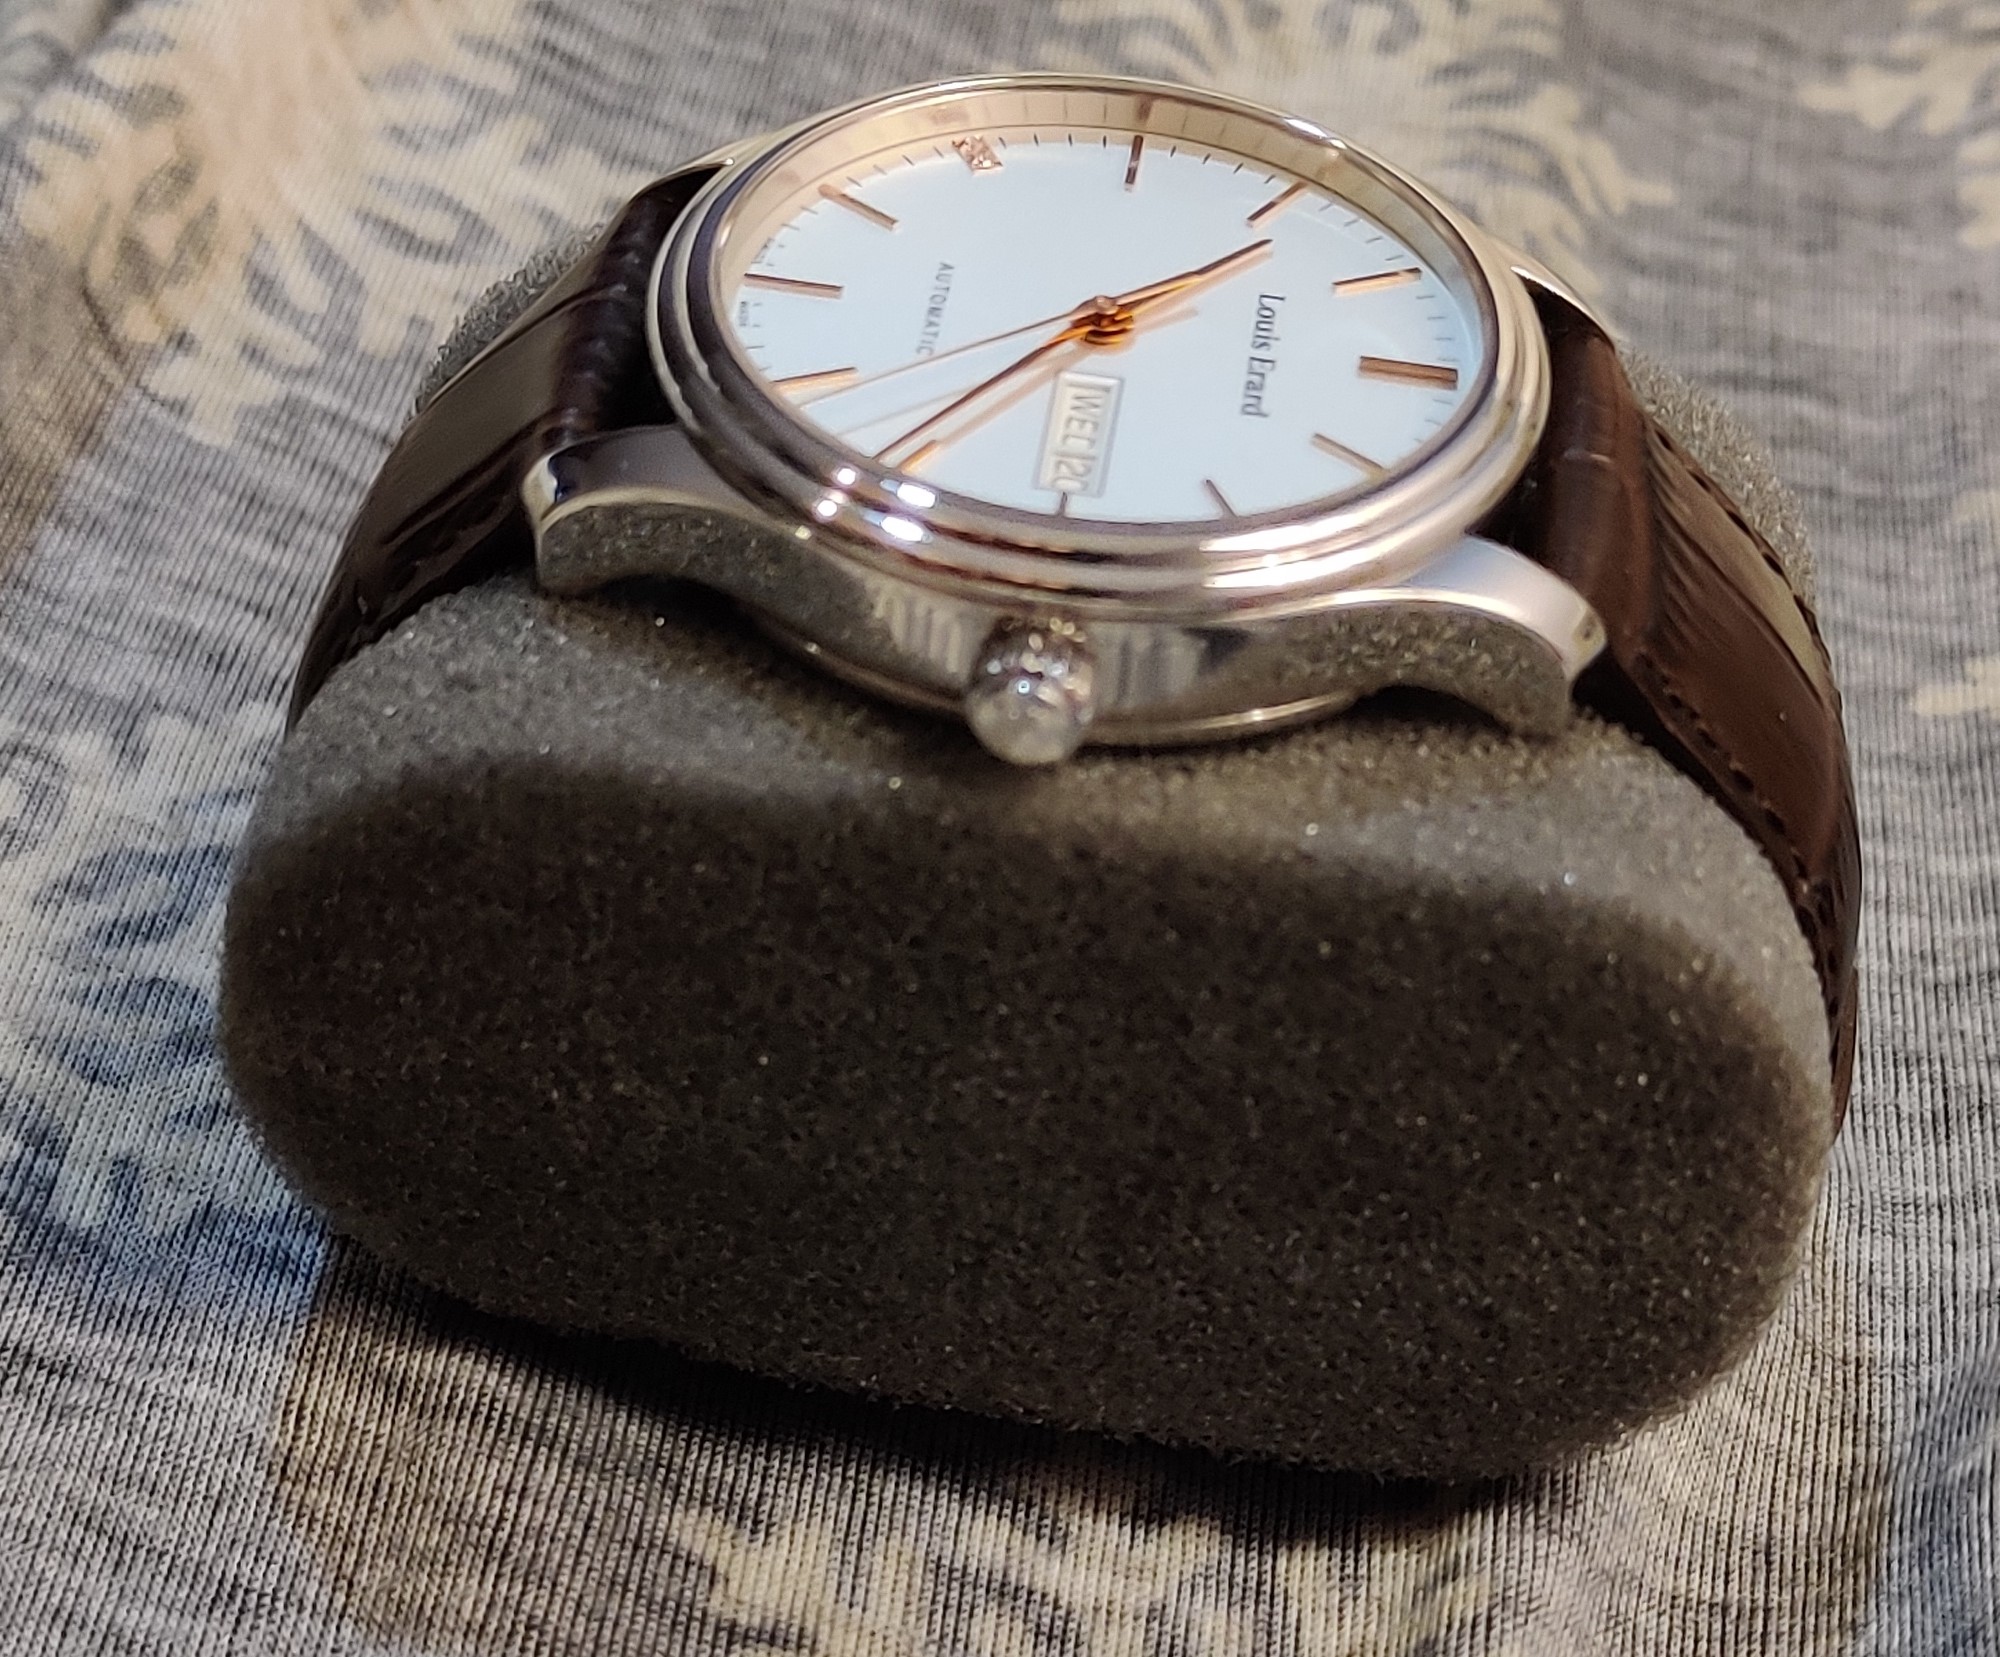 Louis Erard Heritage Day Date Automatic for $513 for sale from a